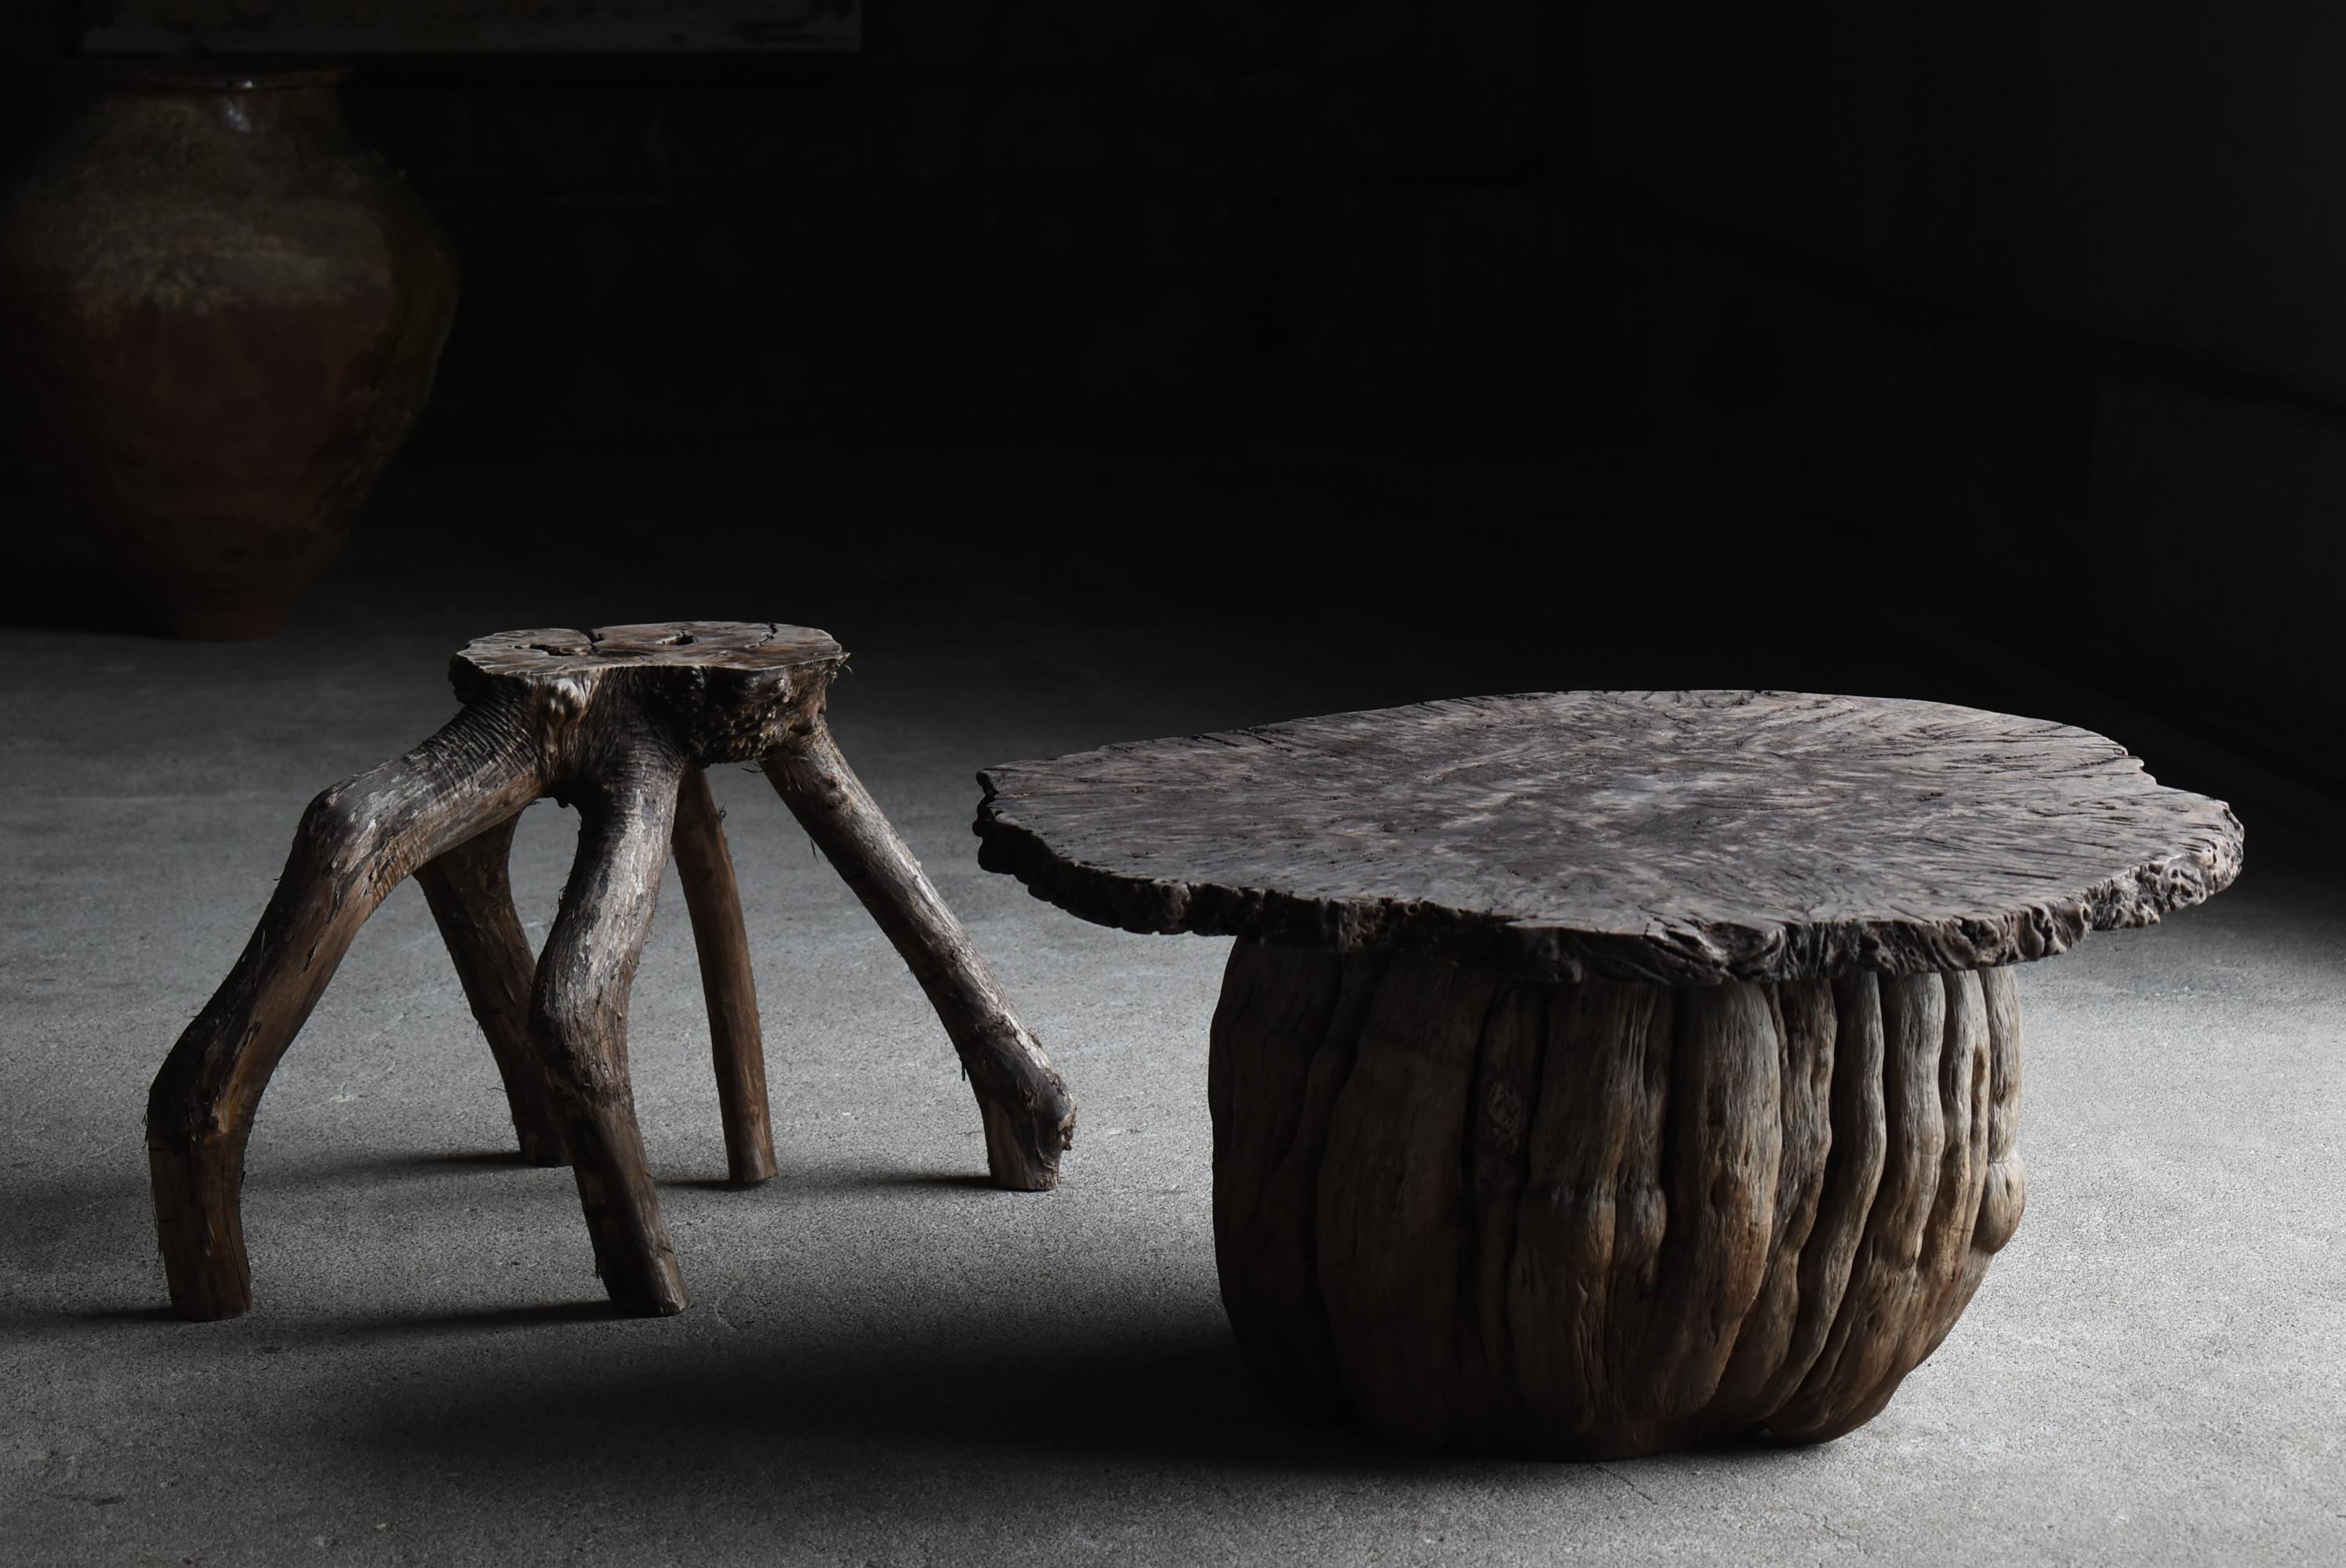 This is a very old Japanese stool made from a tree branch.
It was made in the Meiji period (1860s-1900s).
The detailed timber name is unknown, but it is made of solid hardwood material.

It is a very innovative and dynamic piece of furniture that